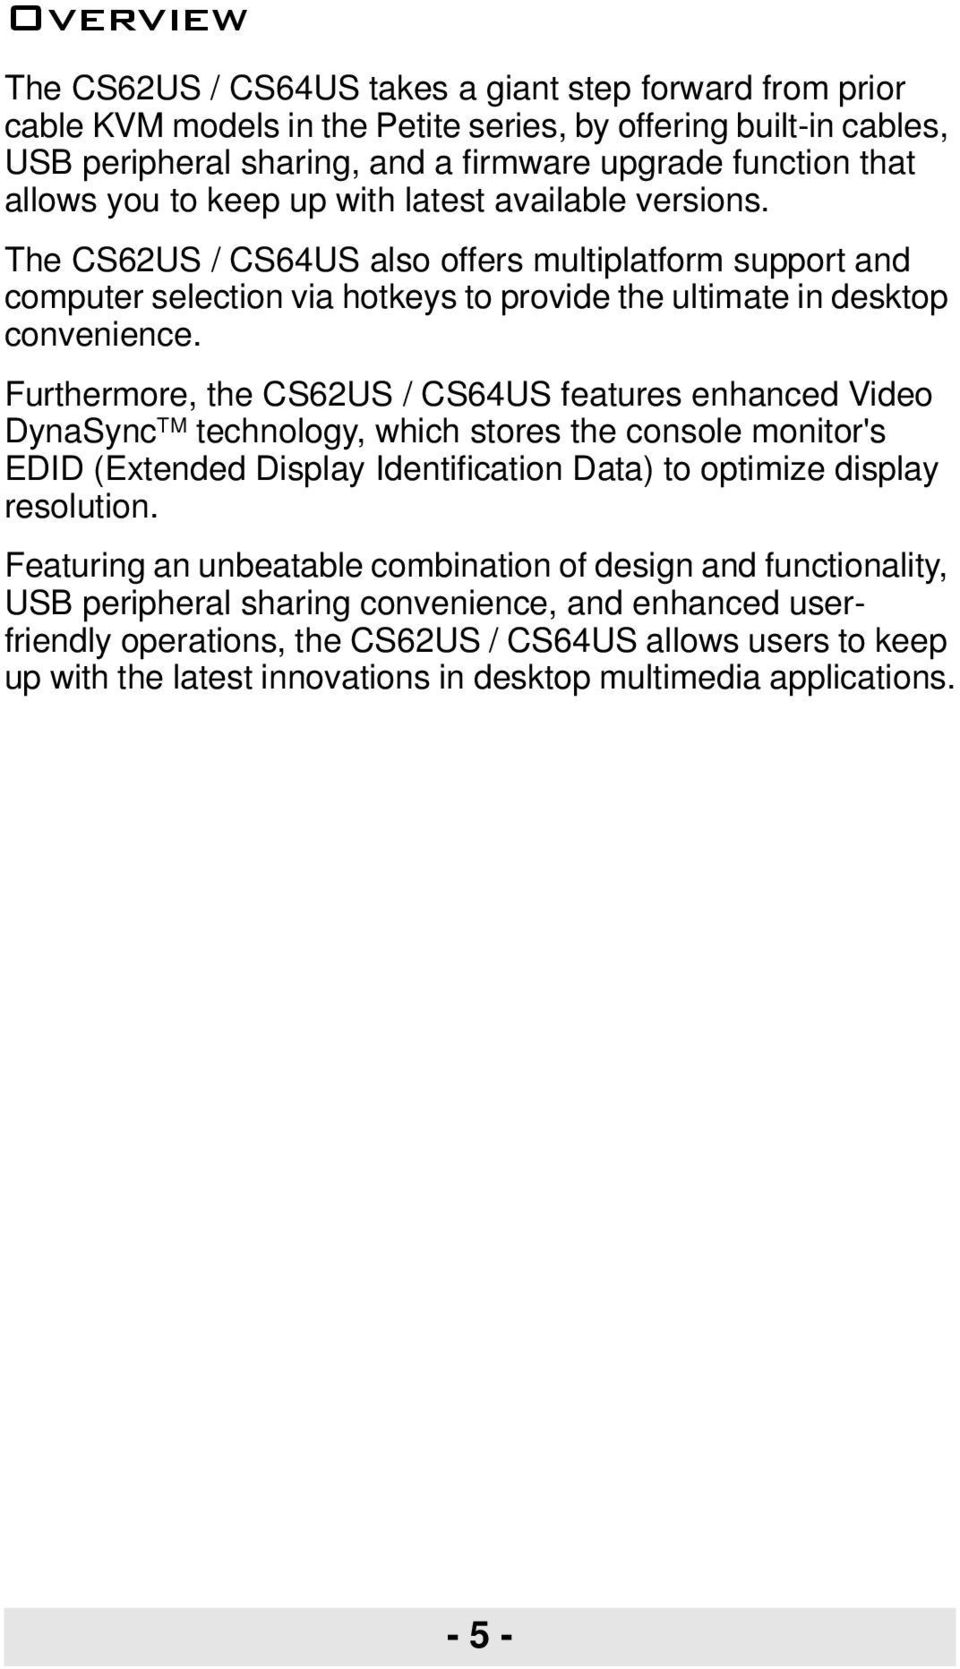 Furthermore, the CS62US / CS64US features enhanced Video DynaSync TM technology, which stores the console monitor's EDID (Extended Display Identification Data) to optimize display resolution.